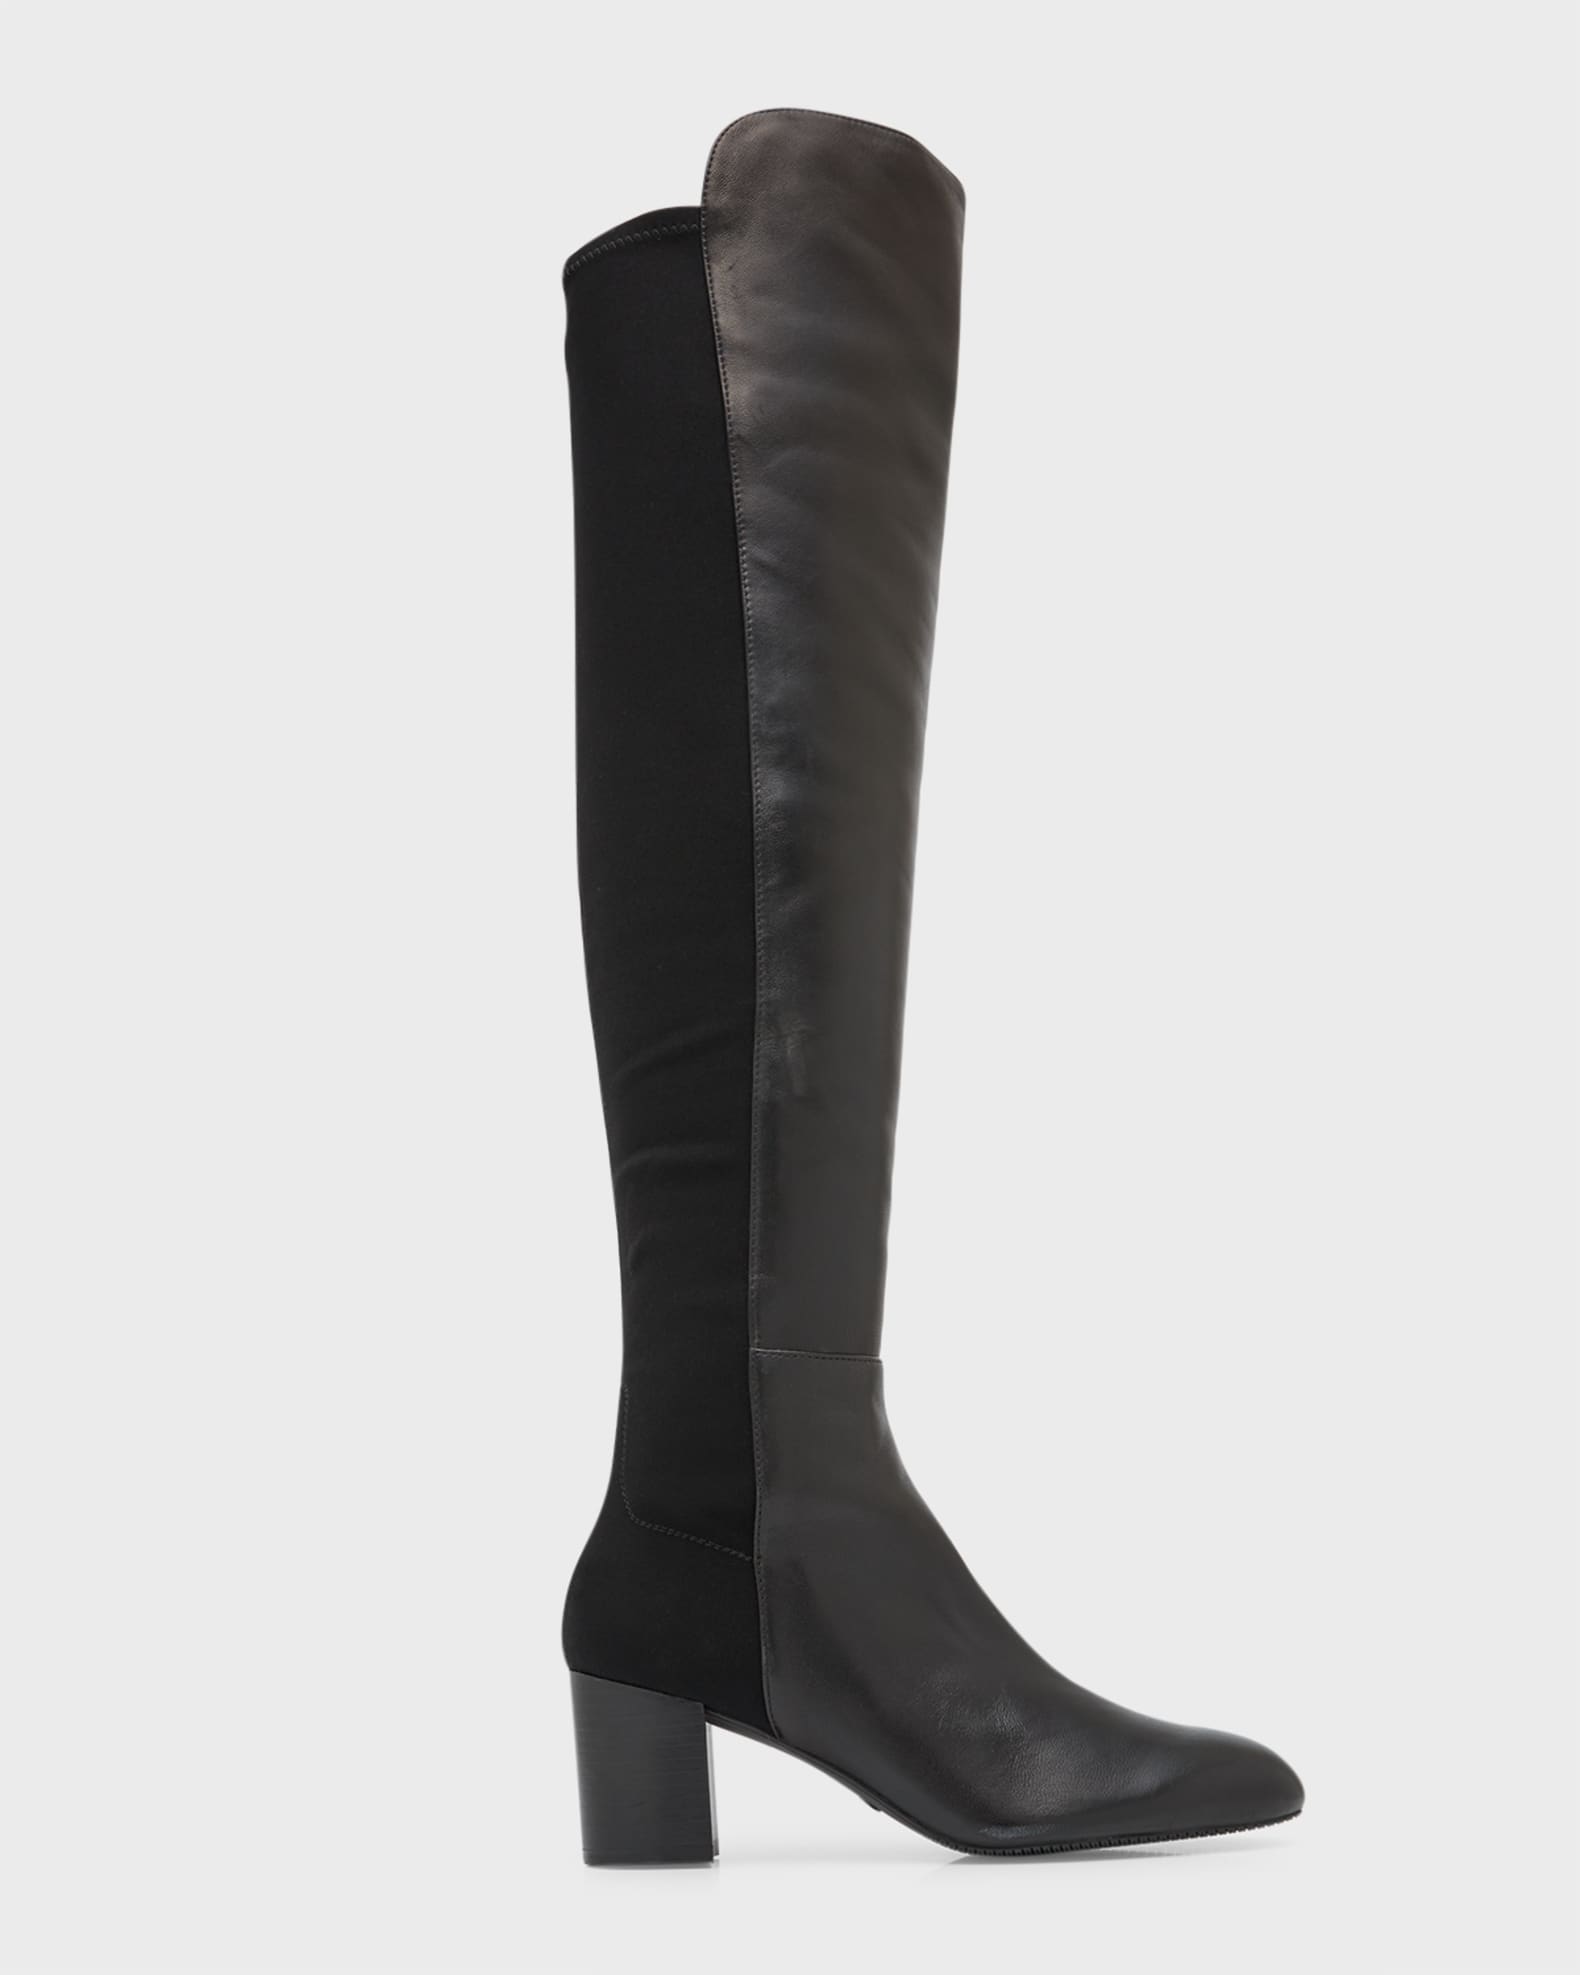 Stuart Weitzman Stretch Leather Over-The-Knee Boots | Neiman Marcus